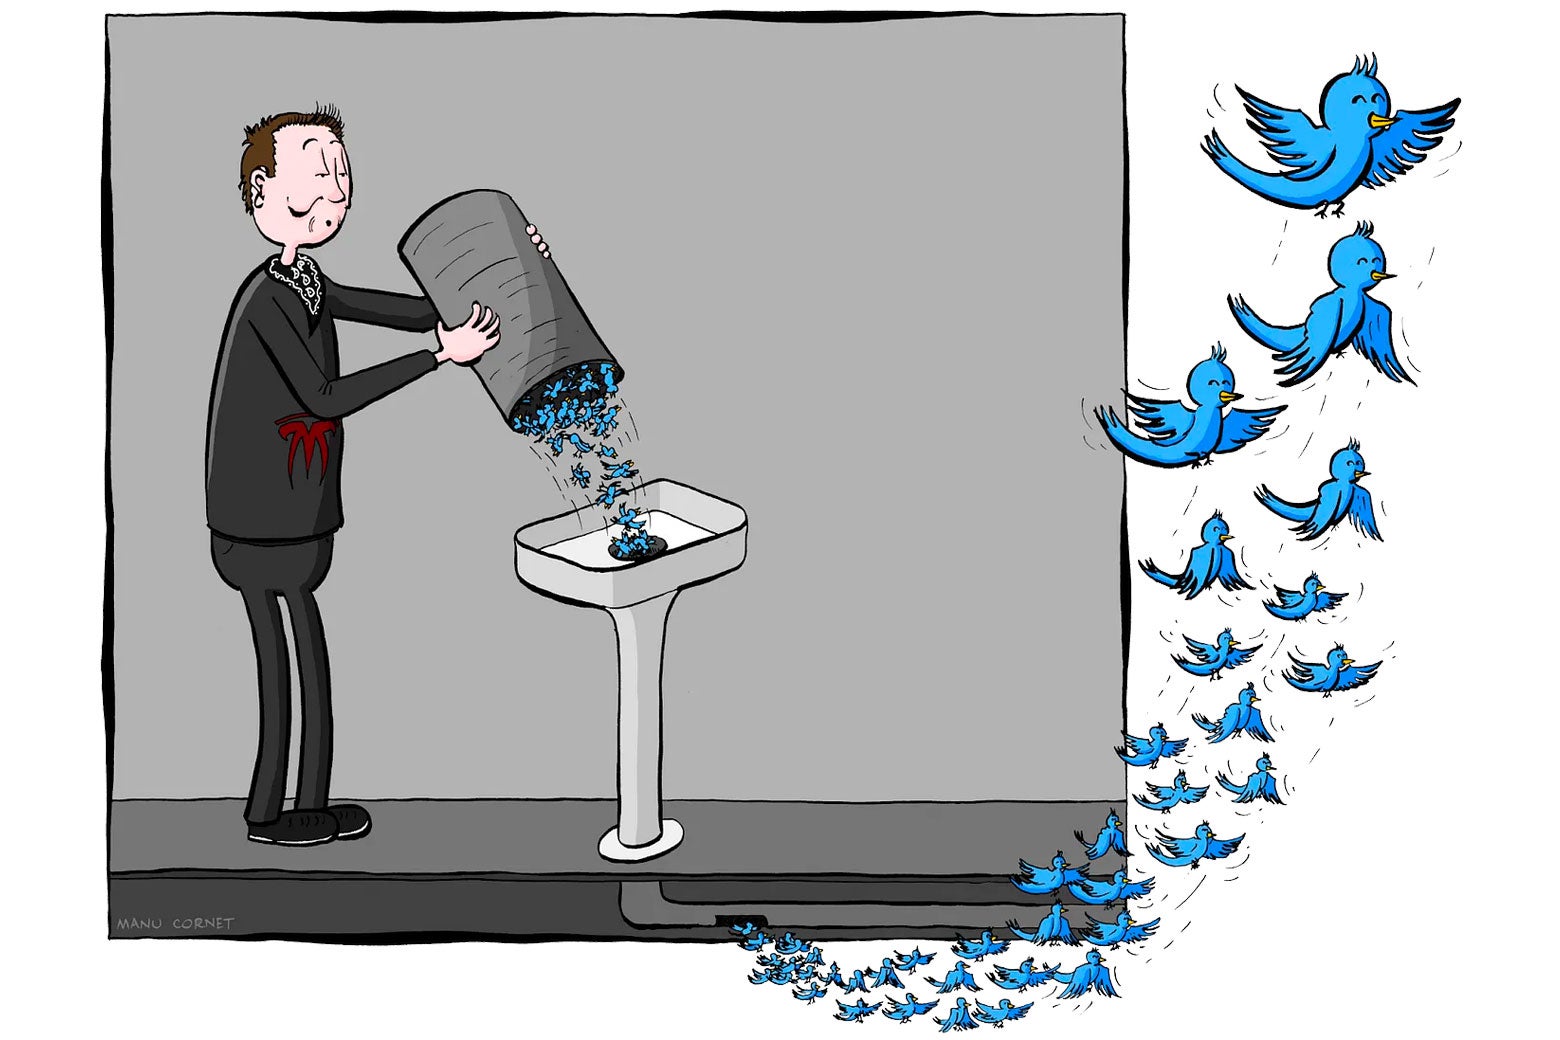 Musk throws Twitter workers down a sink;  they emerge free like a bird.